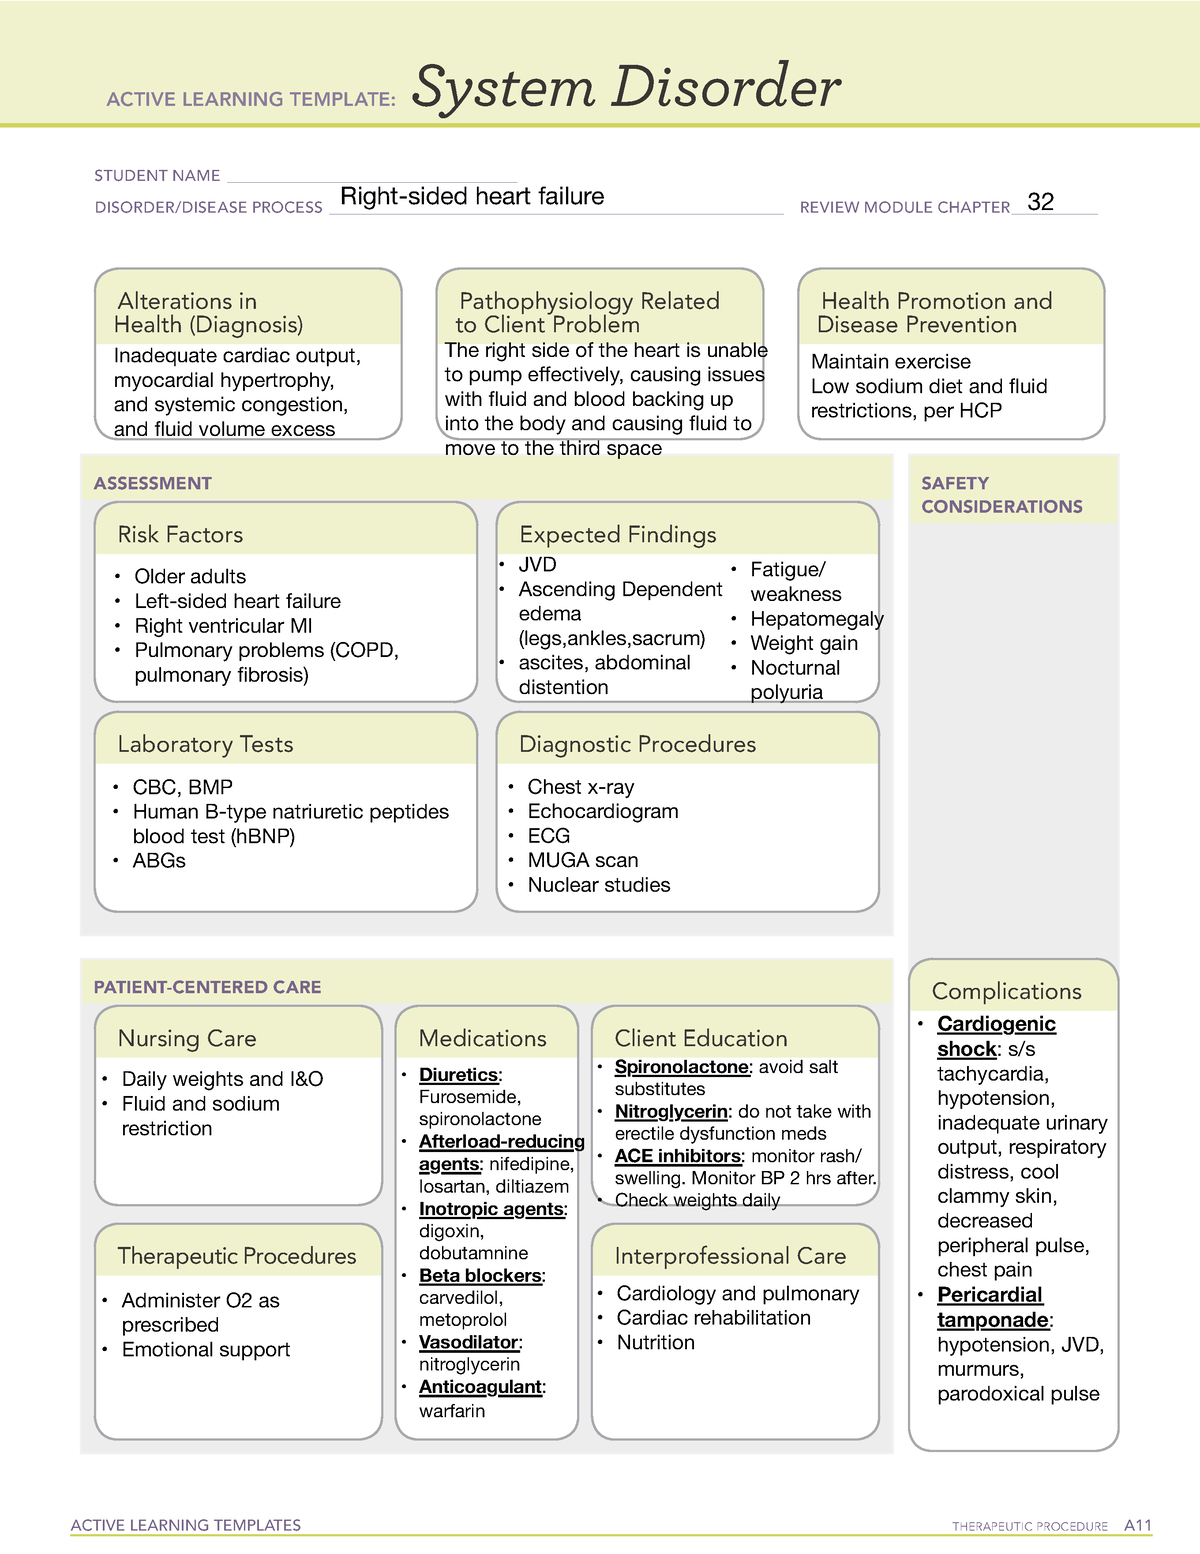 system-disorder-template-active-learning-template-right-sided-heart